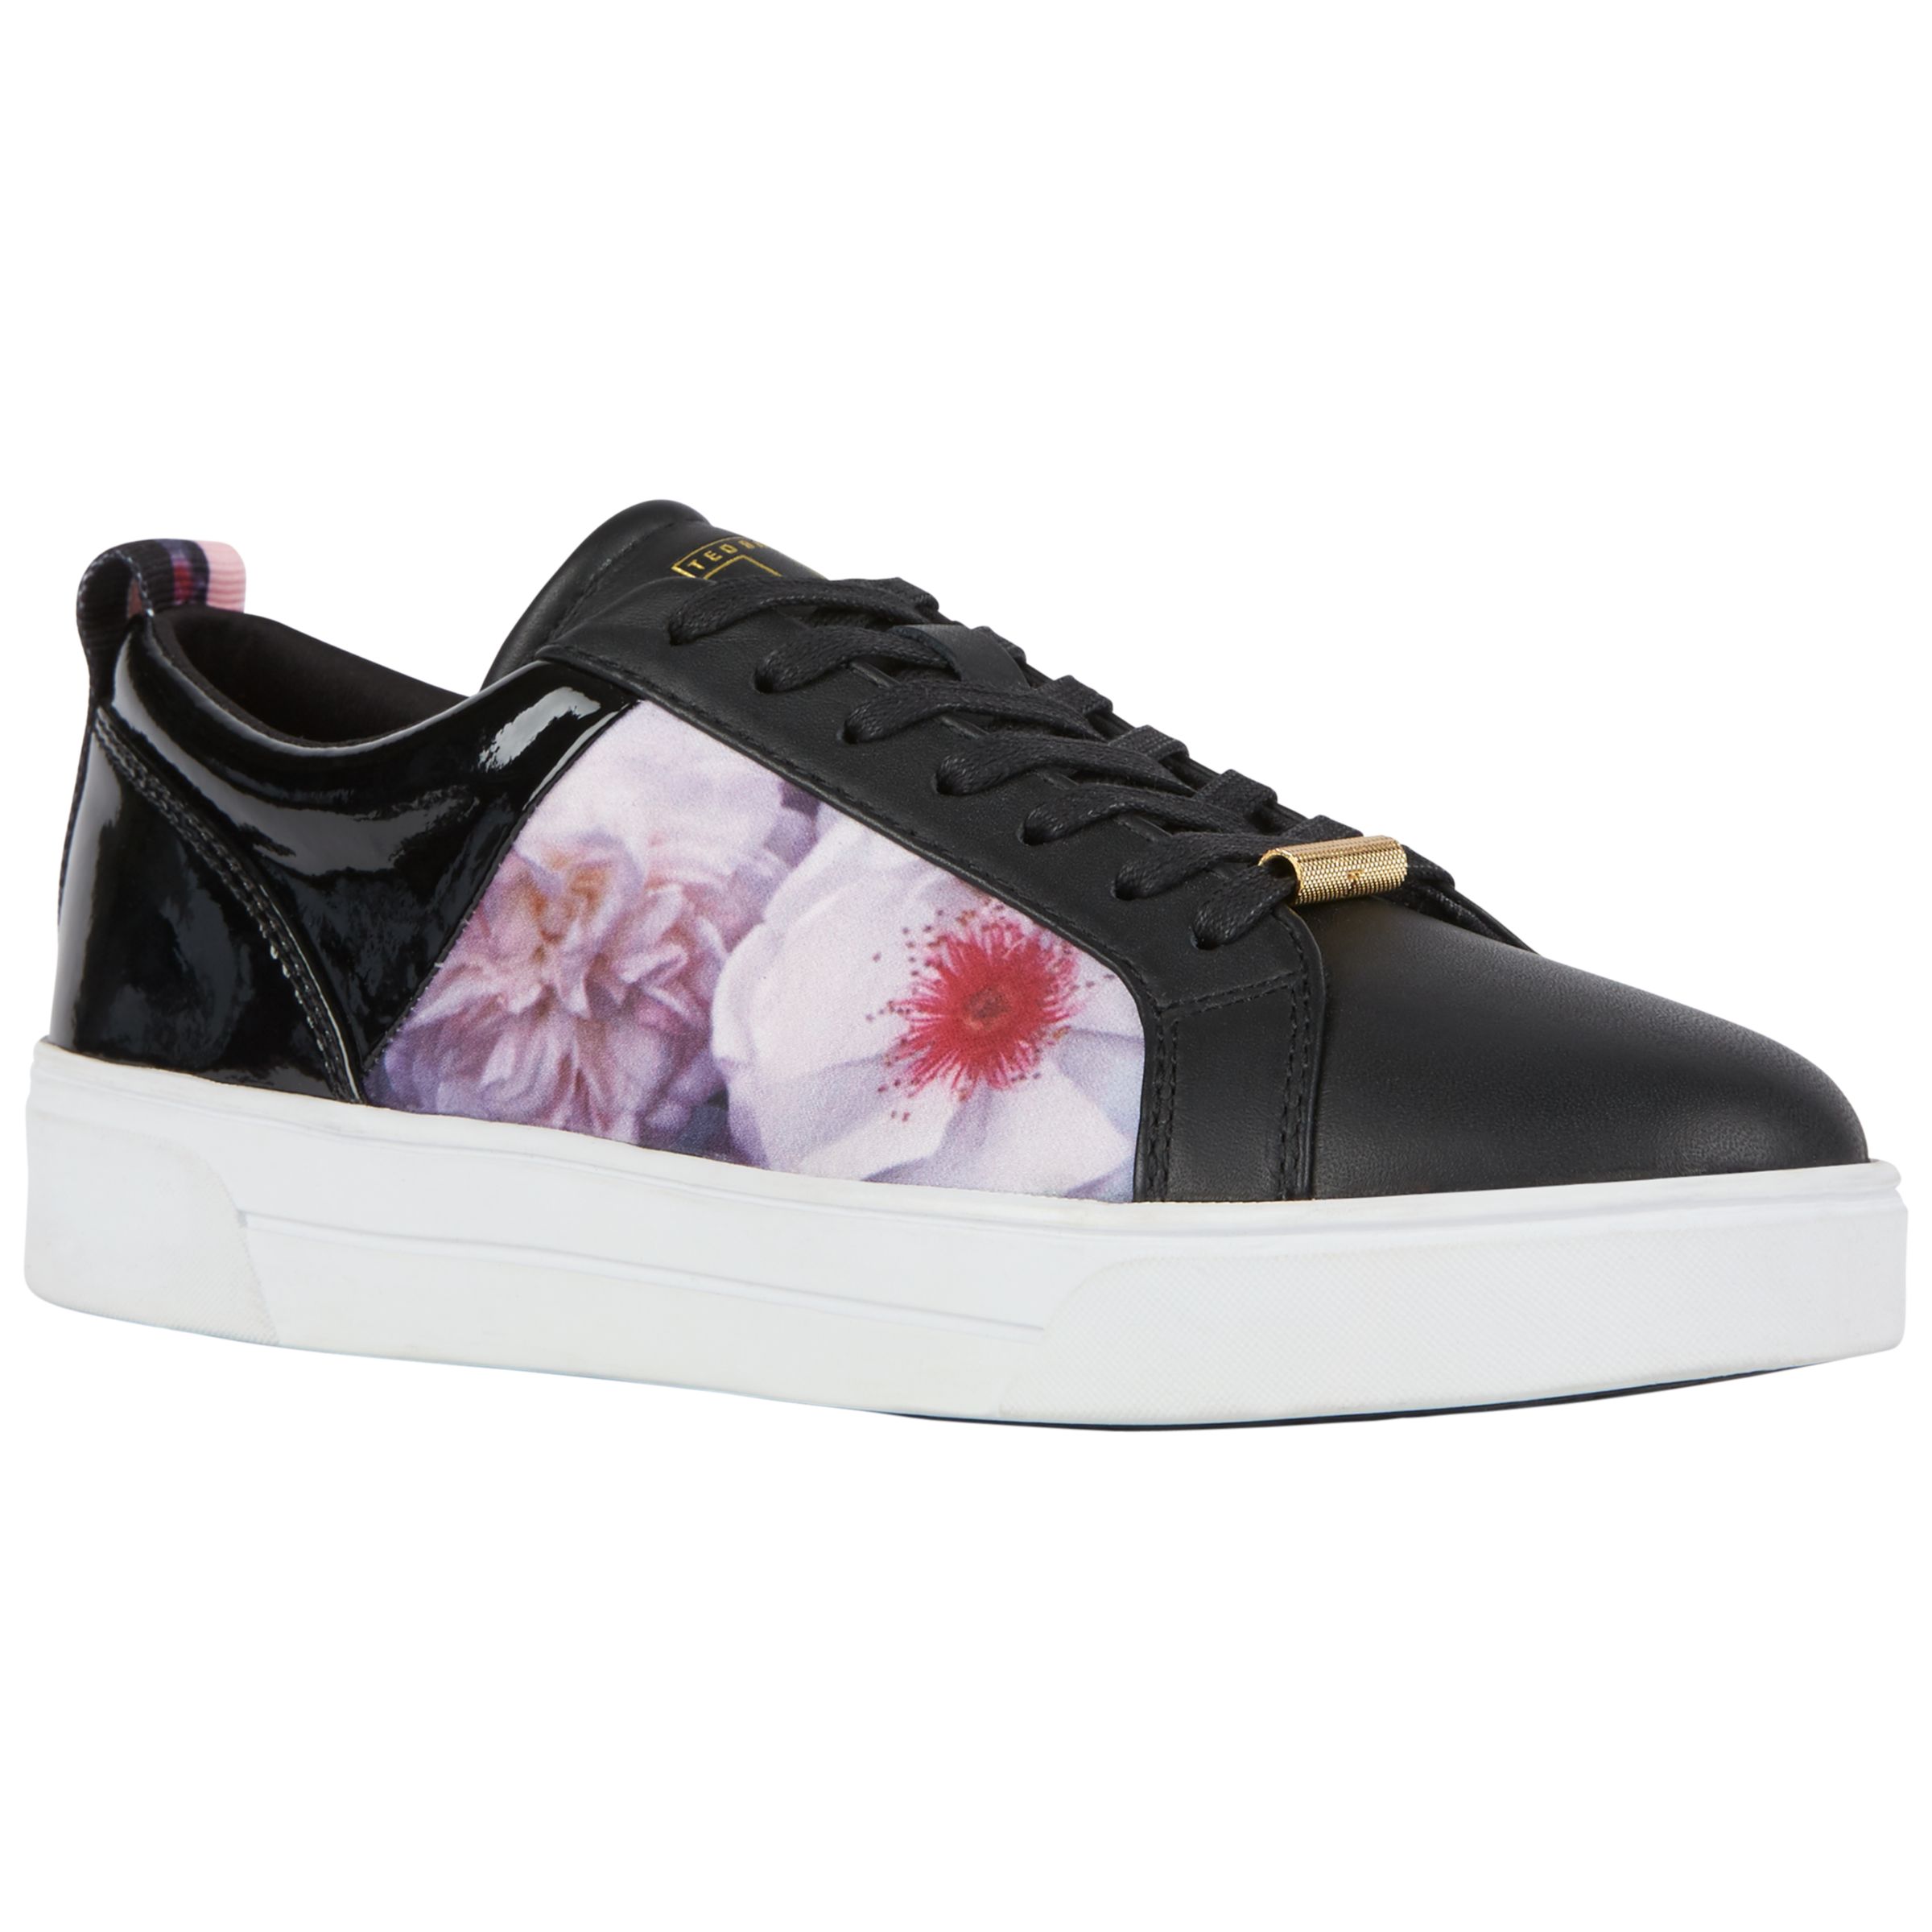 Ted Baker Fushar Lace Up Trainers